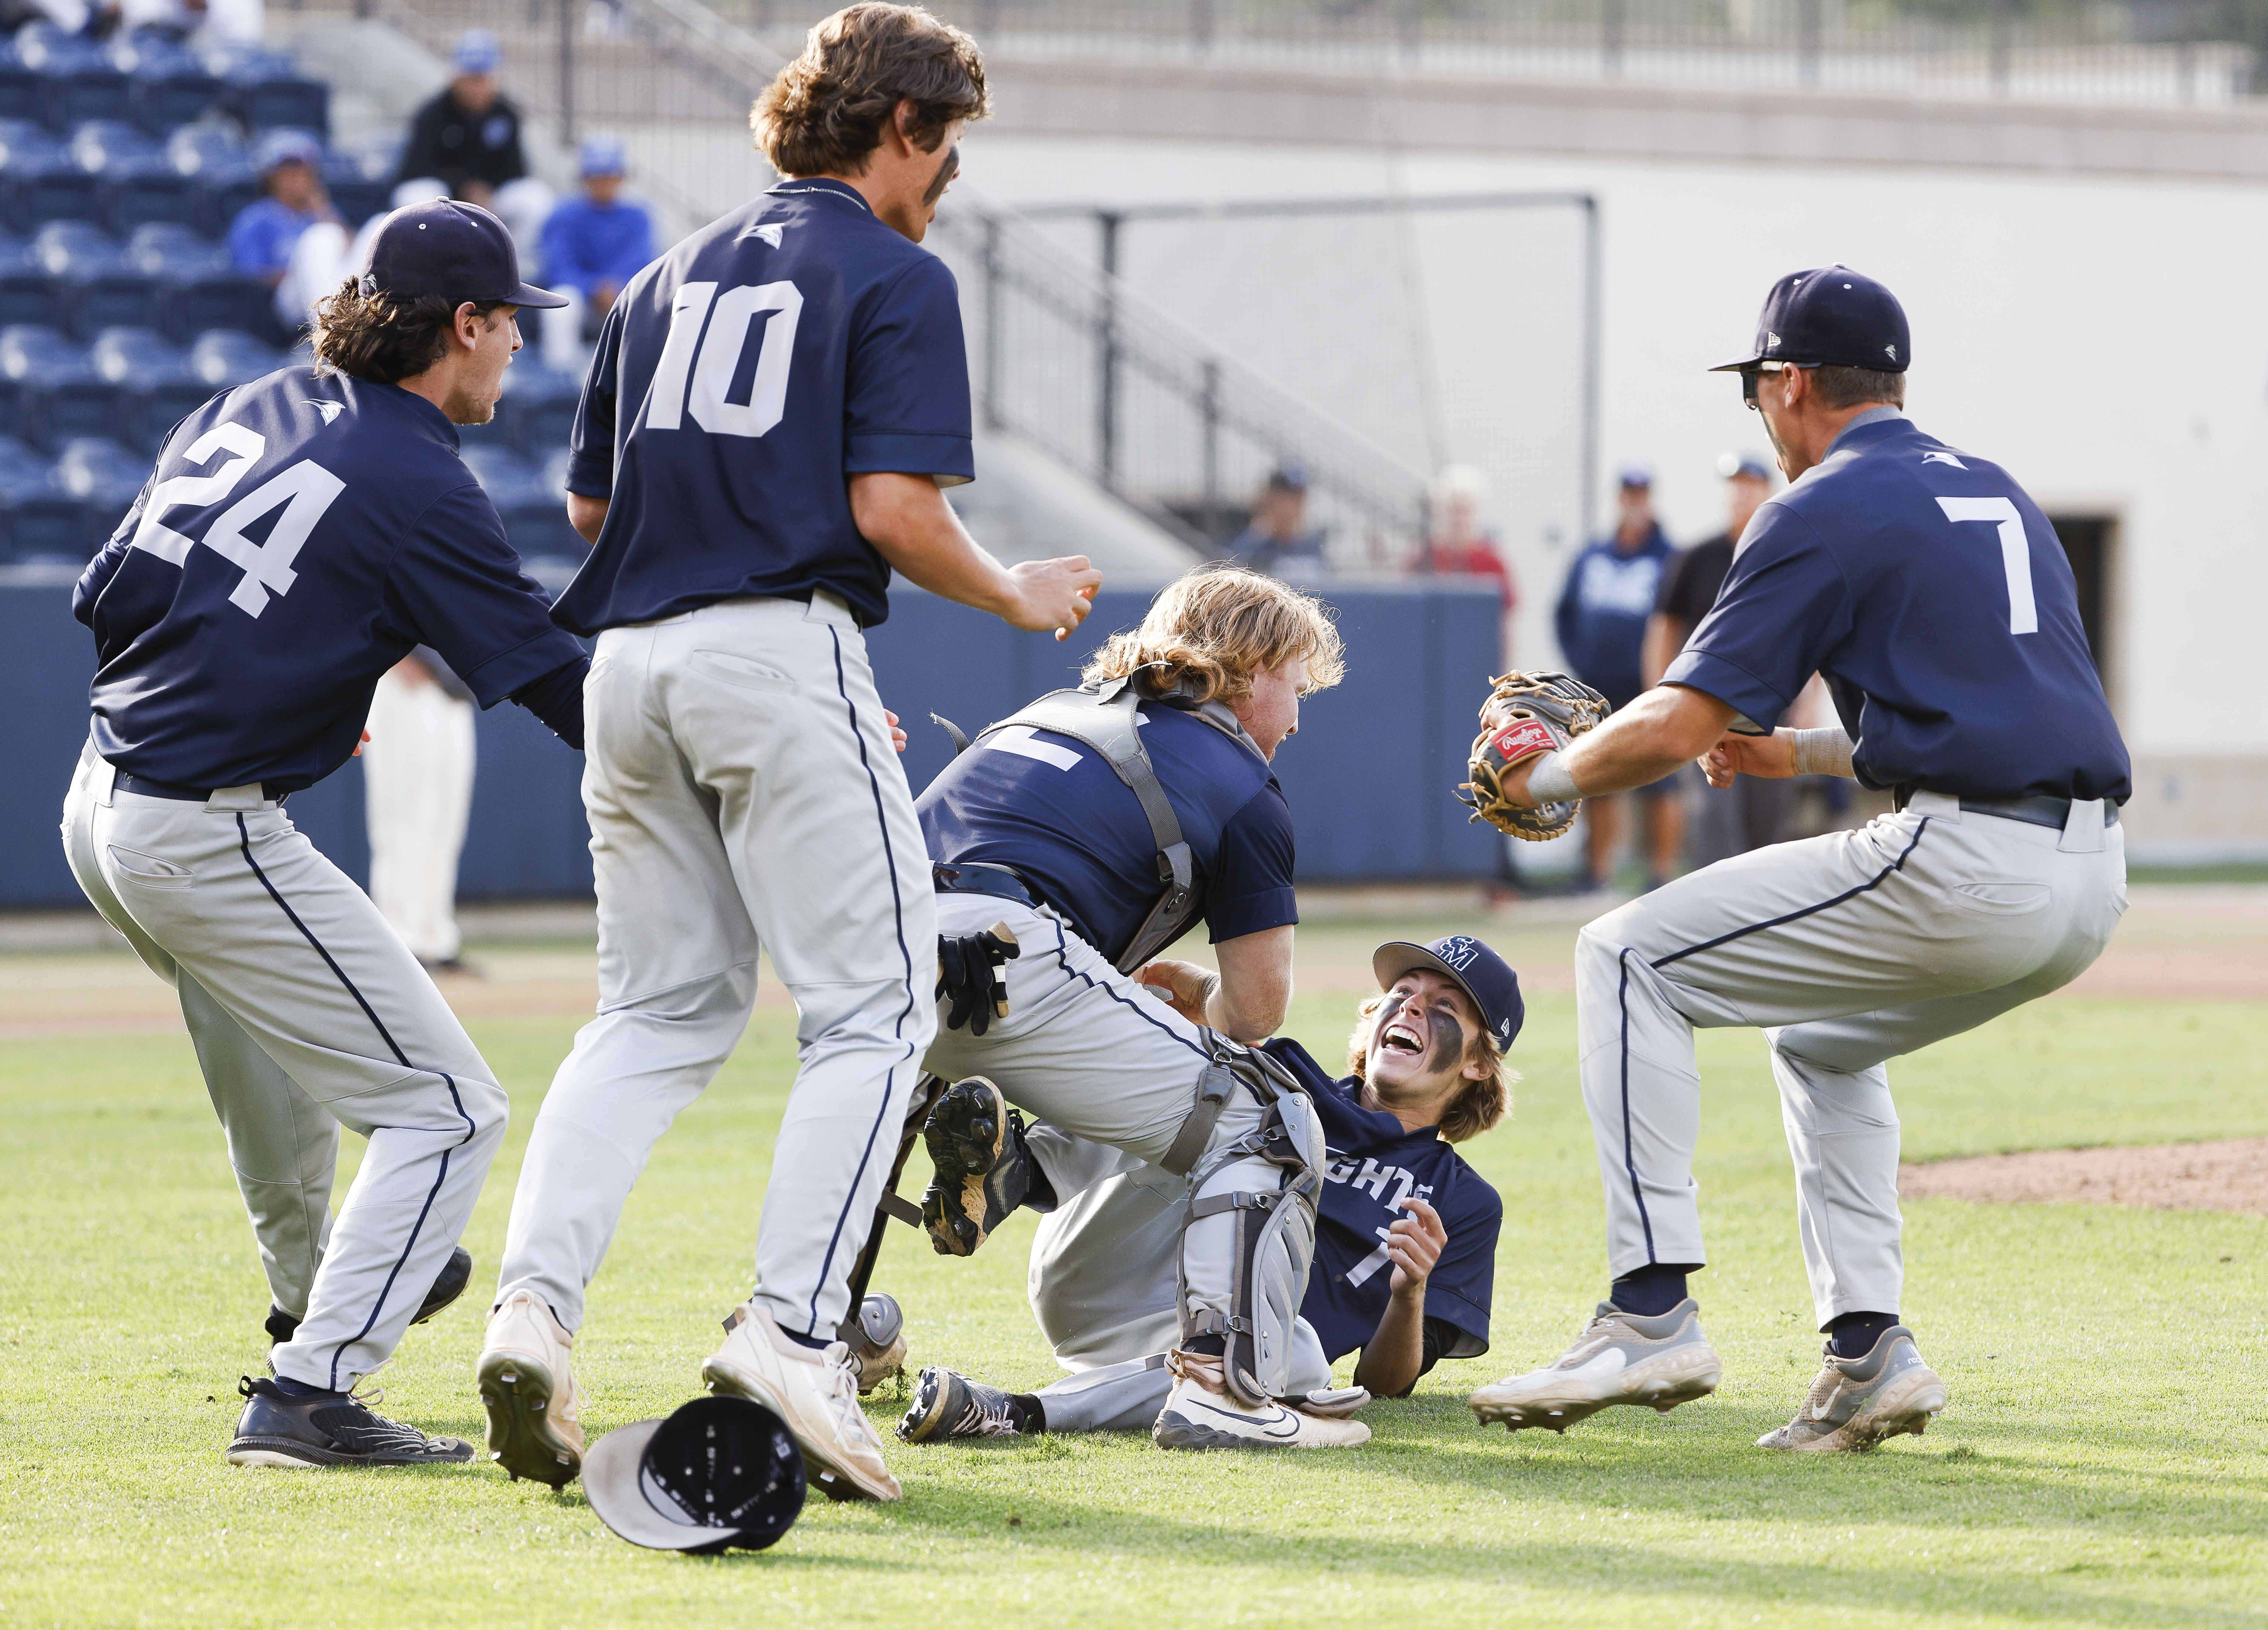 Coach/dad's faith rewarded as San Marcos holds off Poway for Division 1 baseball title